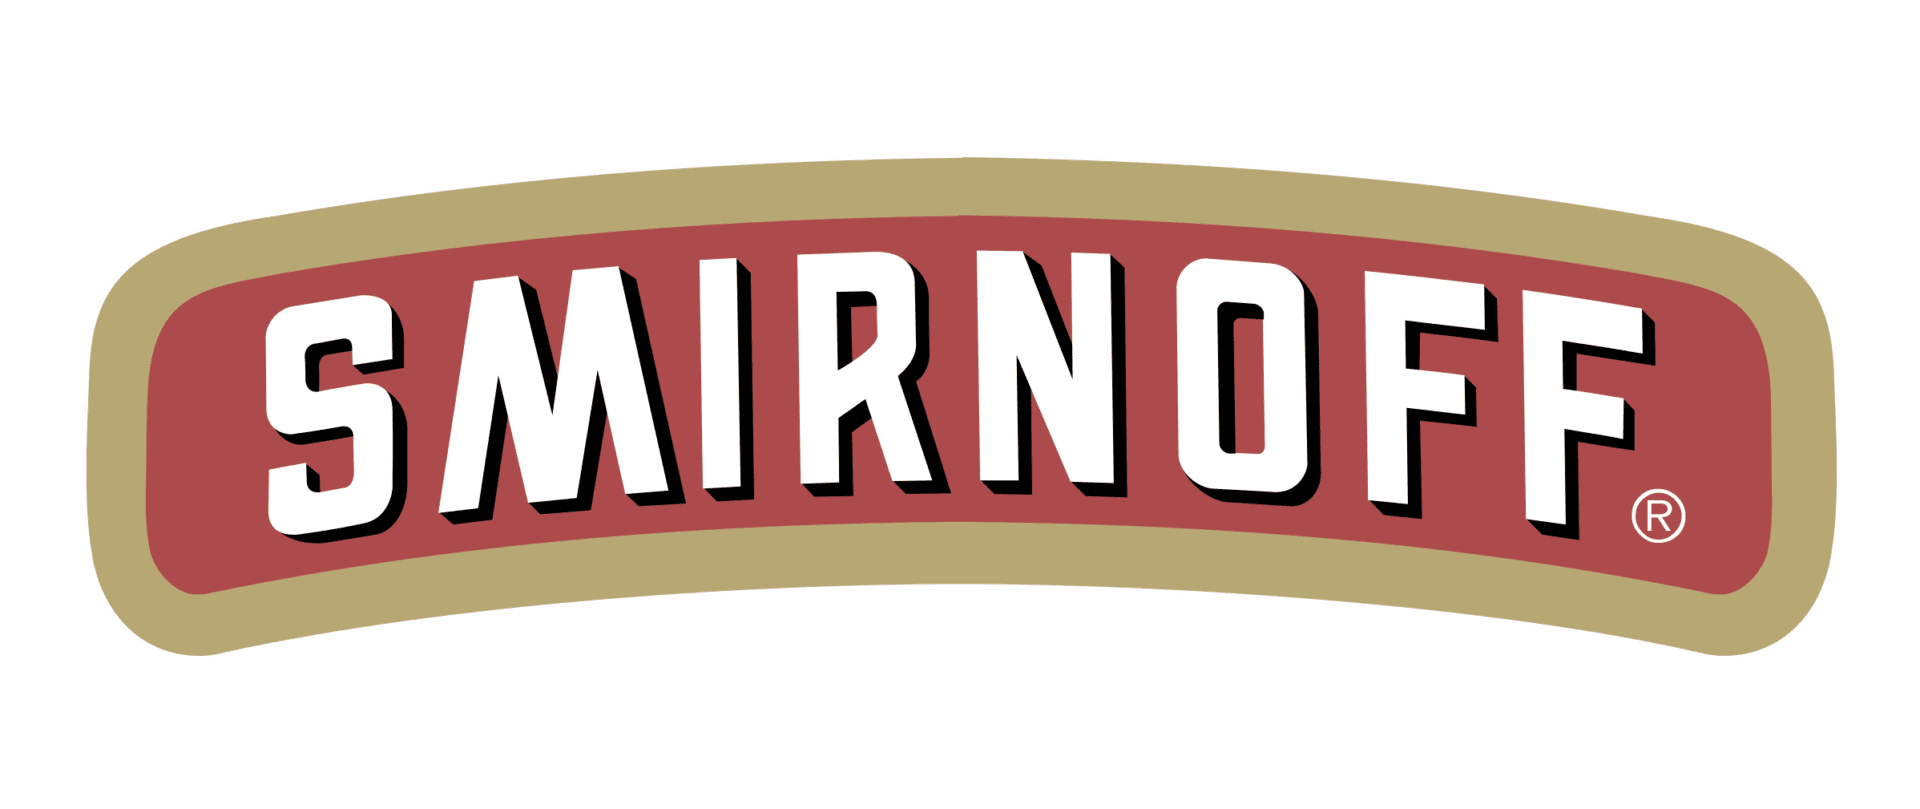 A logo of mirno is shown.